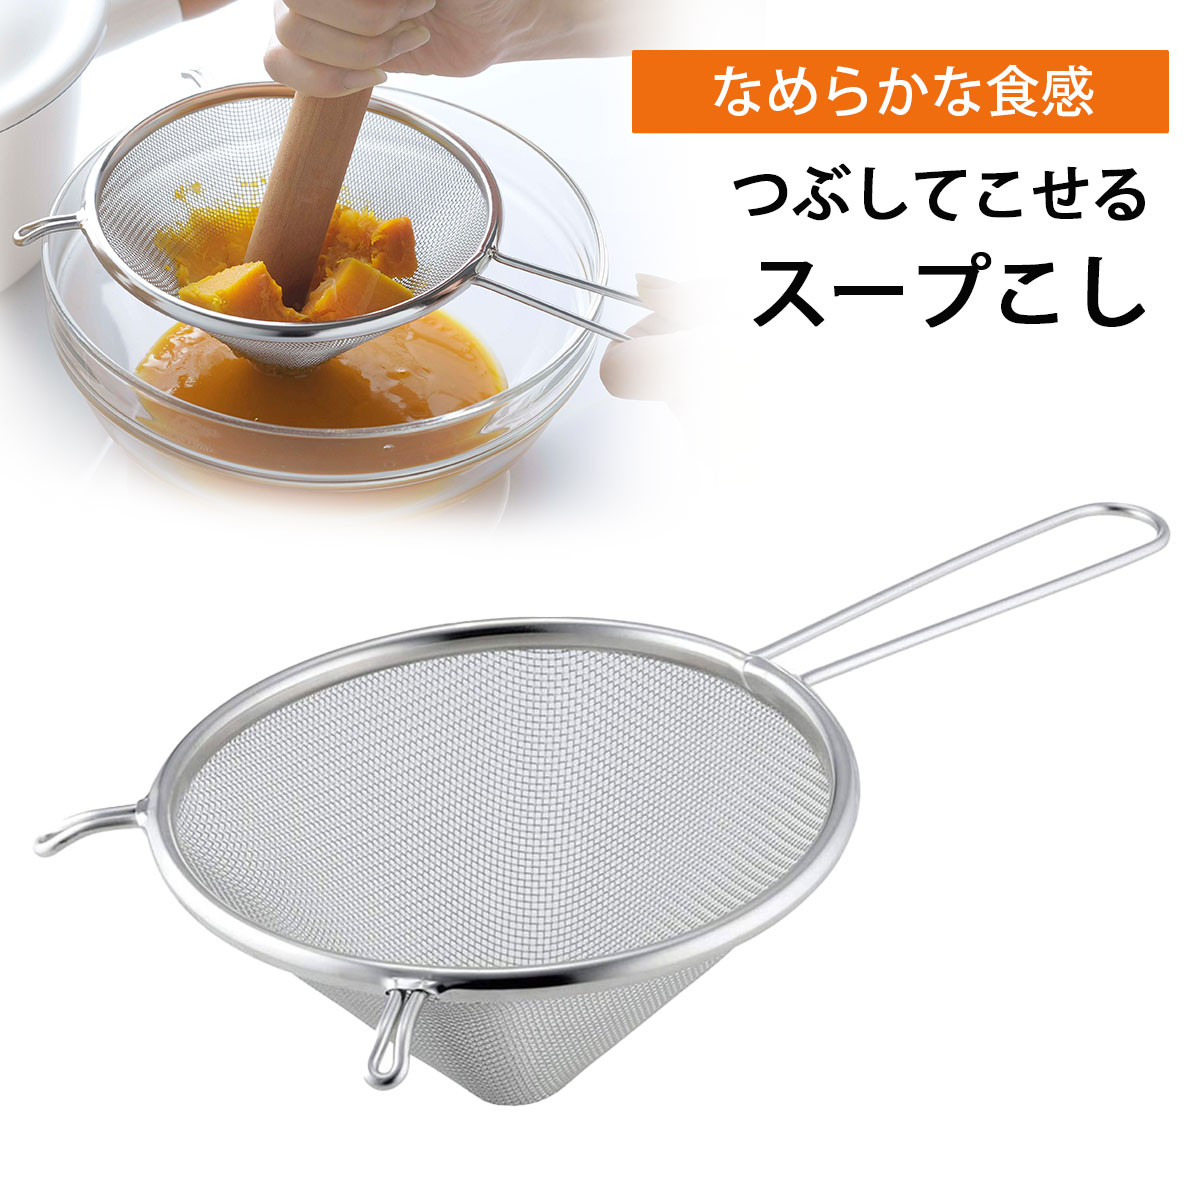 tsu.. lever .. soup .. made in Japan made of stainless steel classical tea cup .. pudding confectionery .... paste 